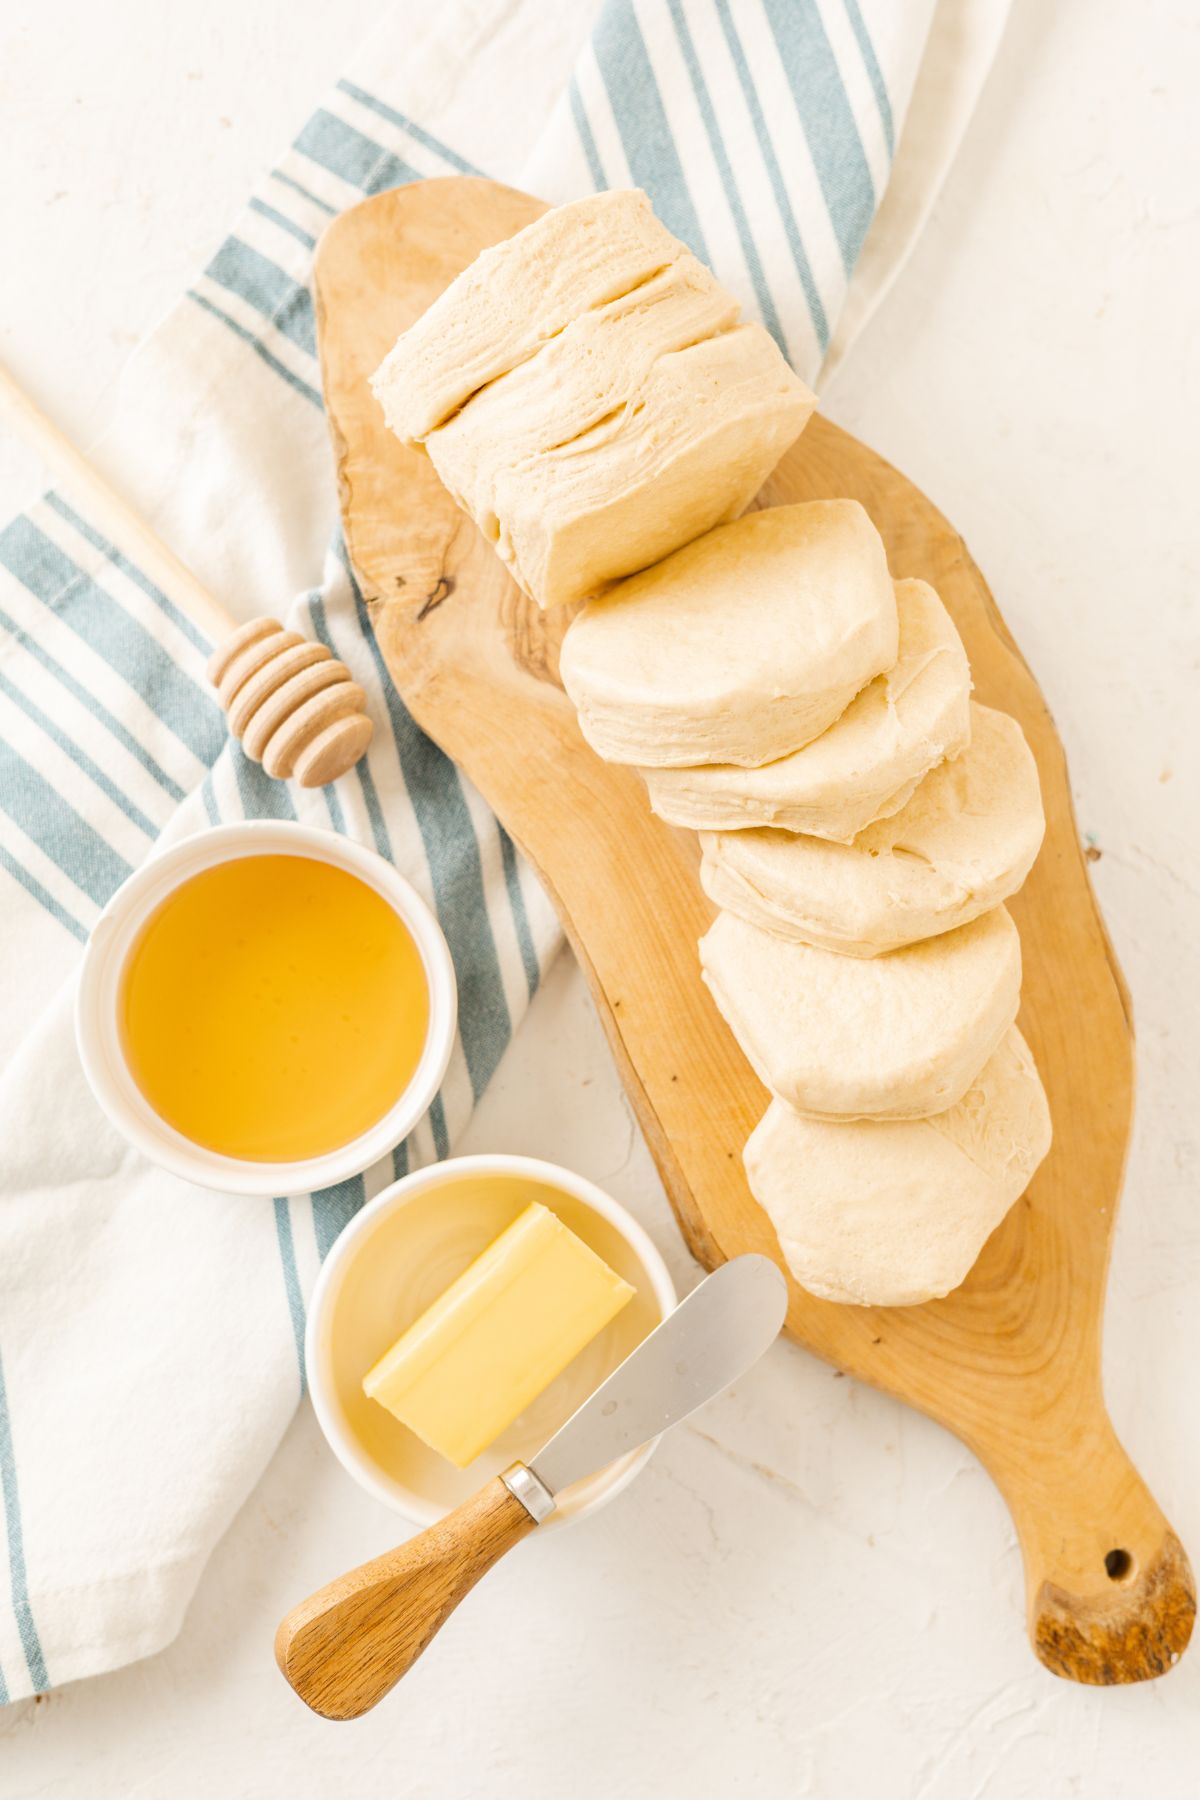 butter and honey on separate bowls and pillsbury grands biscuits on a wooden chopping board